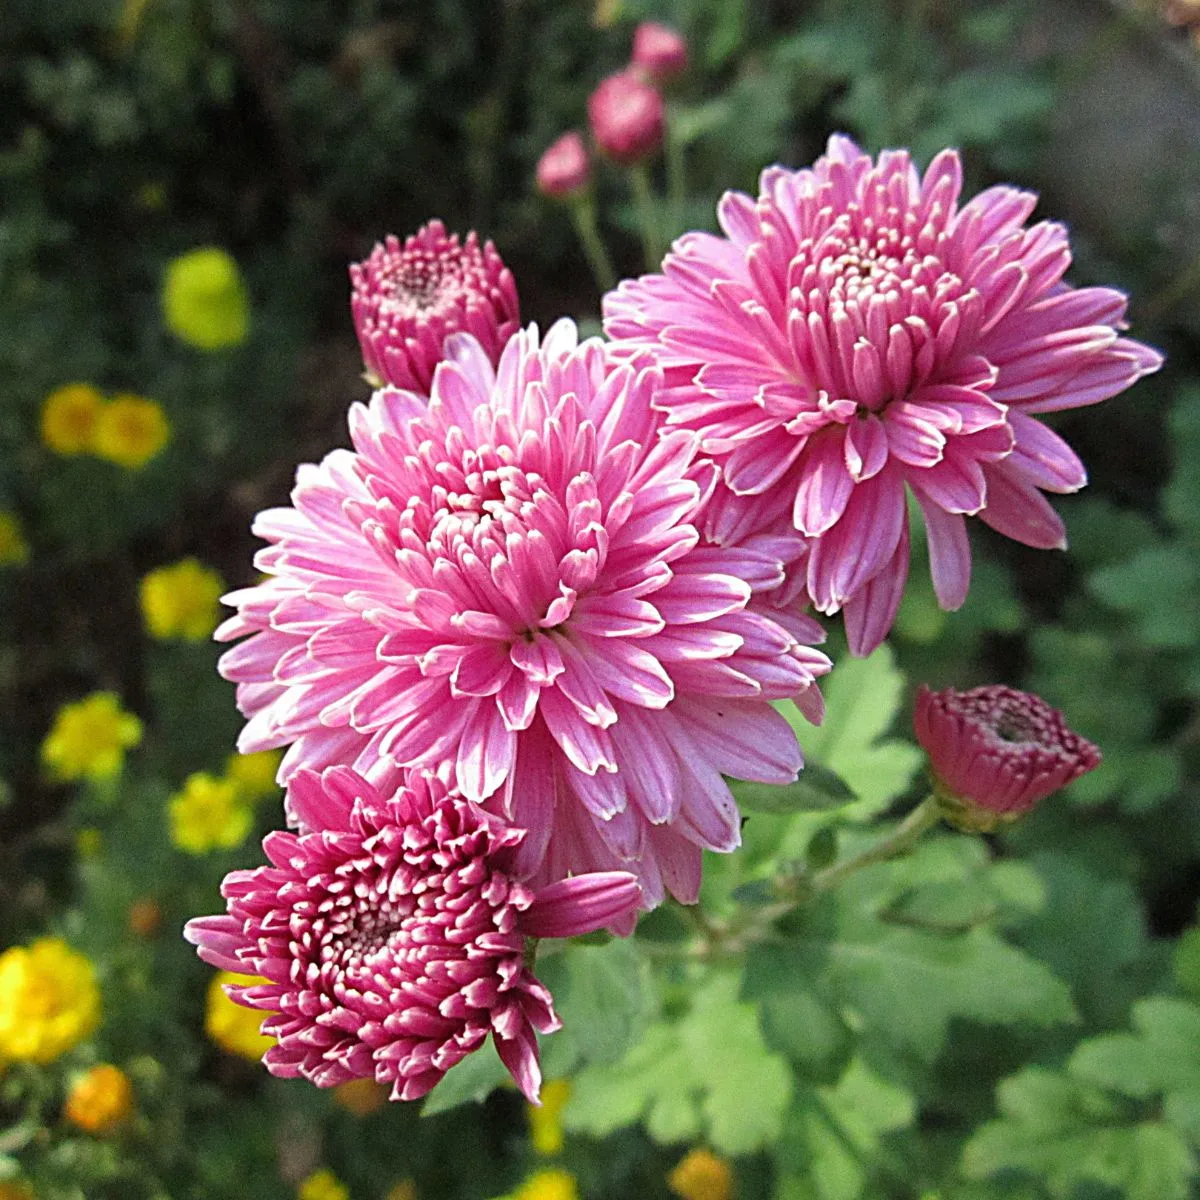 How To Grow Chrysanthemums: A Step-by-step Guide